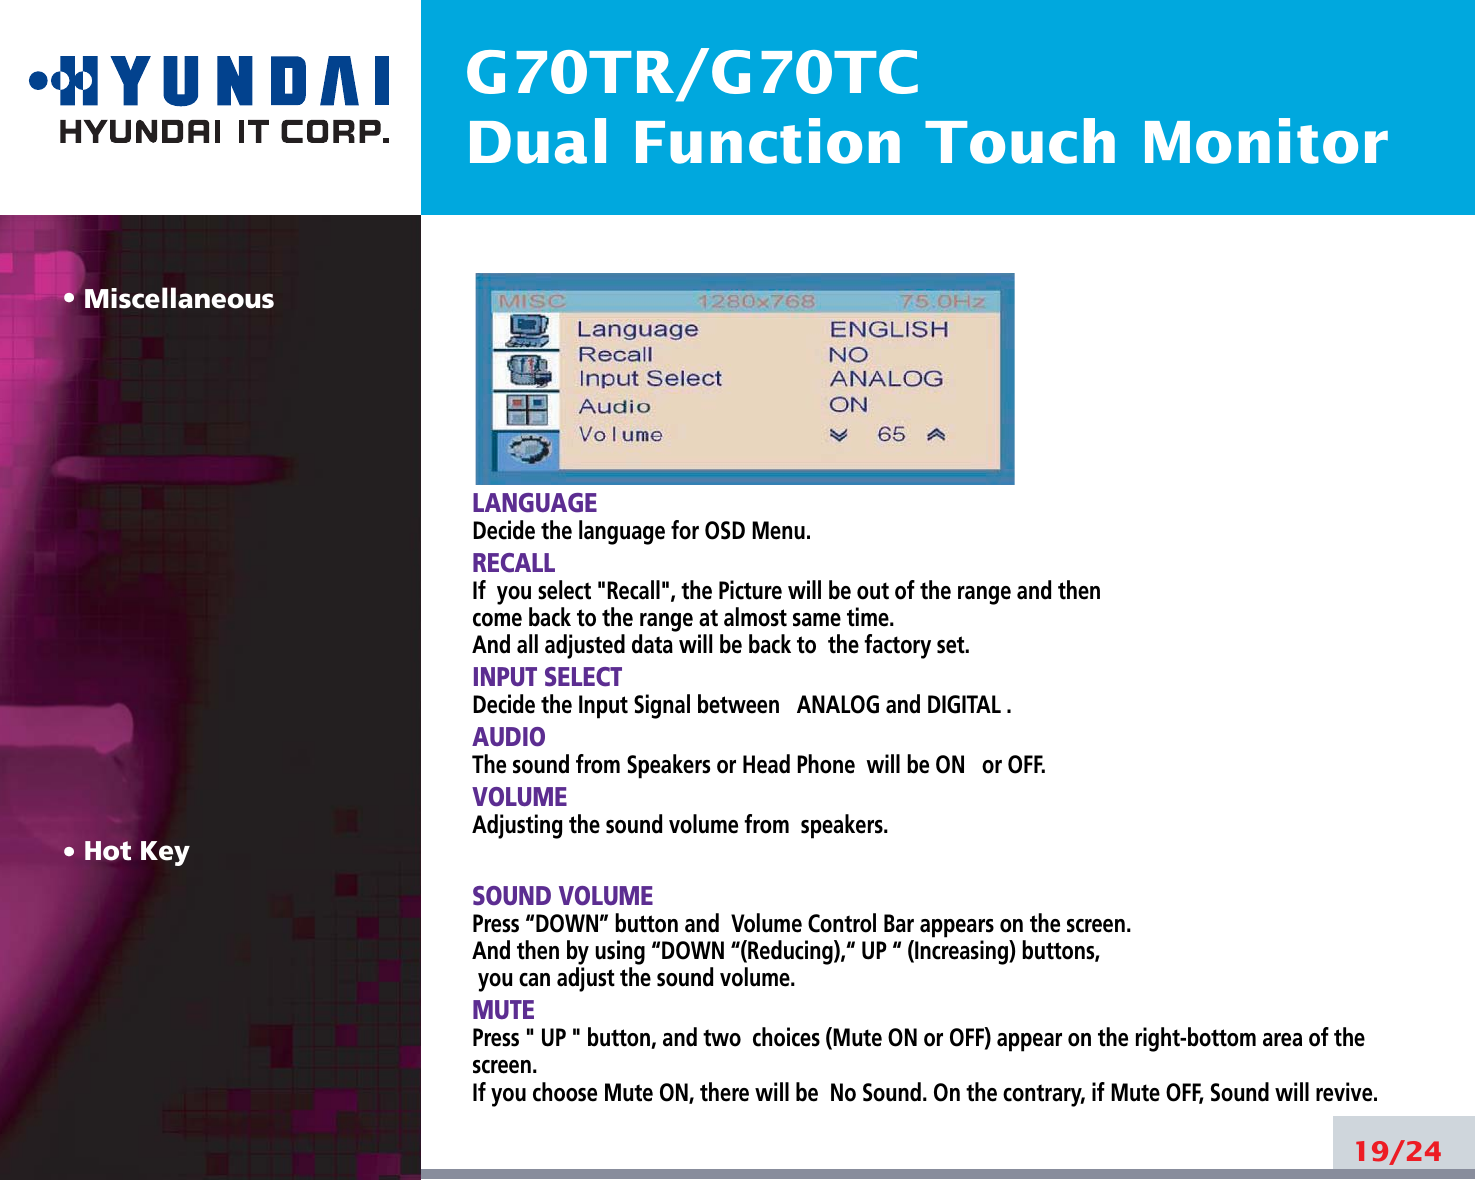 G70TR/G70TCDual Function Touch MonitorMiscellaneousHot KeyLANGUAGEDecide the language for OSD Menu.RECALLIf  you select &quot;Recall&quot;, the Picture will be out of the range and thencome back to the range at almost same time.And all adjusted data will be back to  the factory set.INPUT SELECTDecide the Input Signal between ANALOG and DIGITAL .AUDIOThe sound from Speakers or Head Phone  will be ON or OFF.VOLUMEAdjusting the sound volume from  speakers.SOUND VOLUMEPress “DOWN” button and  Volume Control Bar appears on the screen. And then by using “DOWN “(Reducing),“ UP “ (Increasing) buttons, you can adjust the sound volume.MUTEPress &quot; UP &quot; button, and two  choices (Mute ON or OFF) appear on the right-bottom area of thescreen.If you choose Mute ON, there will be  No Sound. On the contrary, if Mute OFF, Sound will revive.19/24